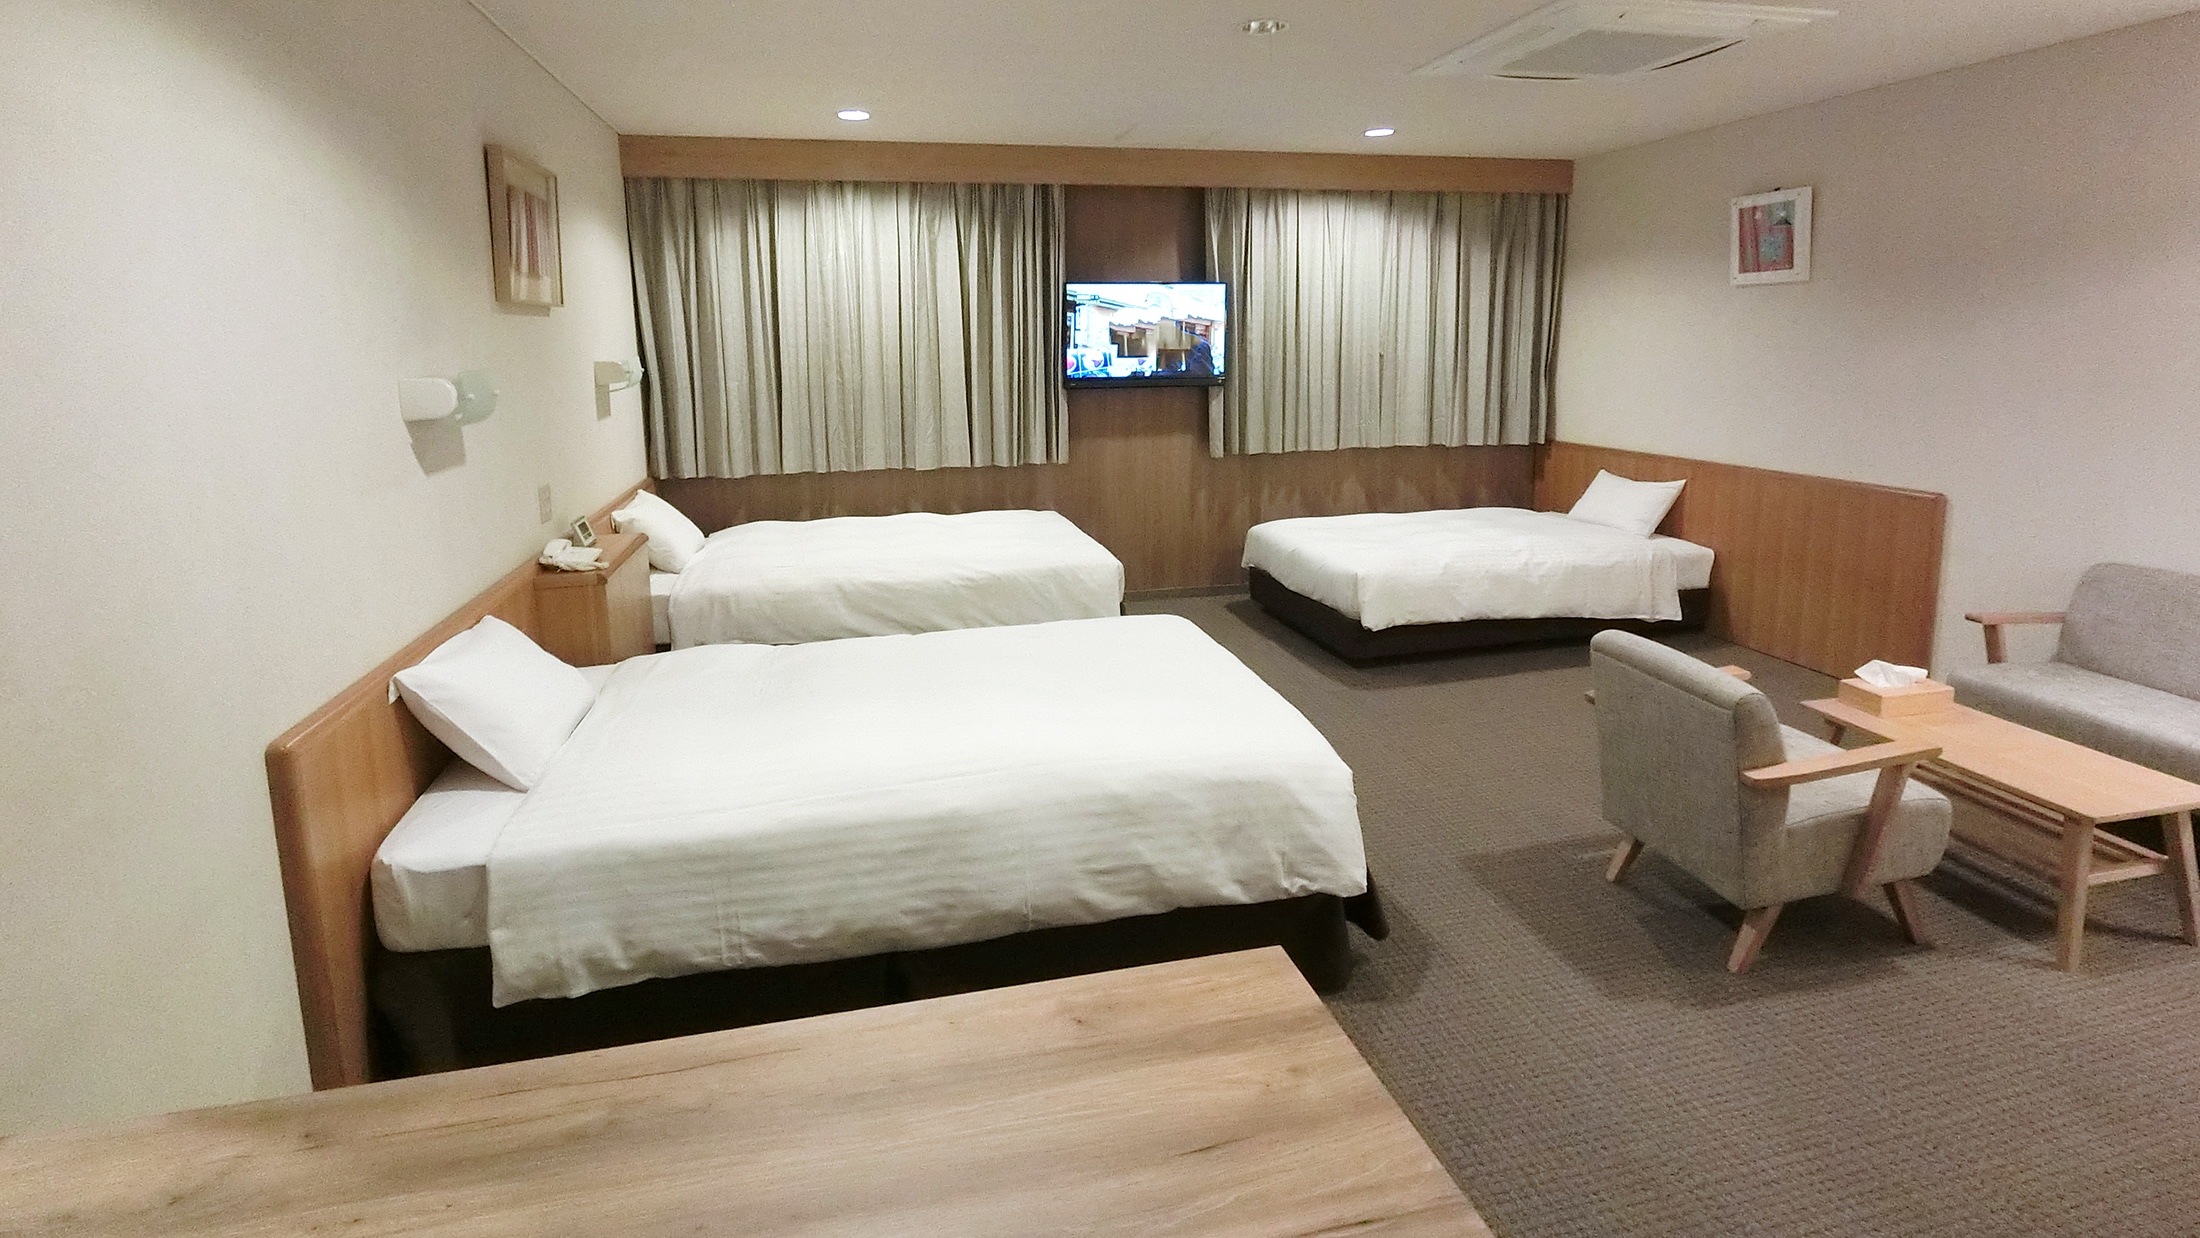 [Triple room] Non-smoking only 2 semi-double beds + 1 single bed up to 6 people * Simmons bed